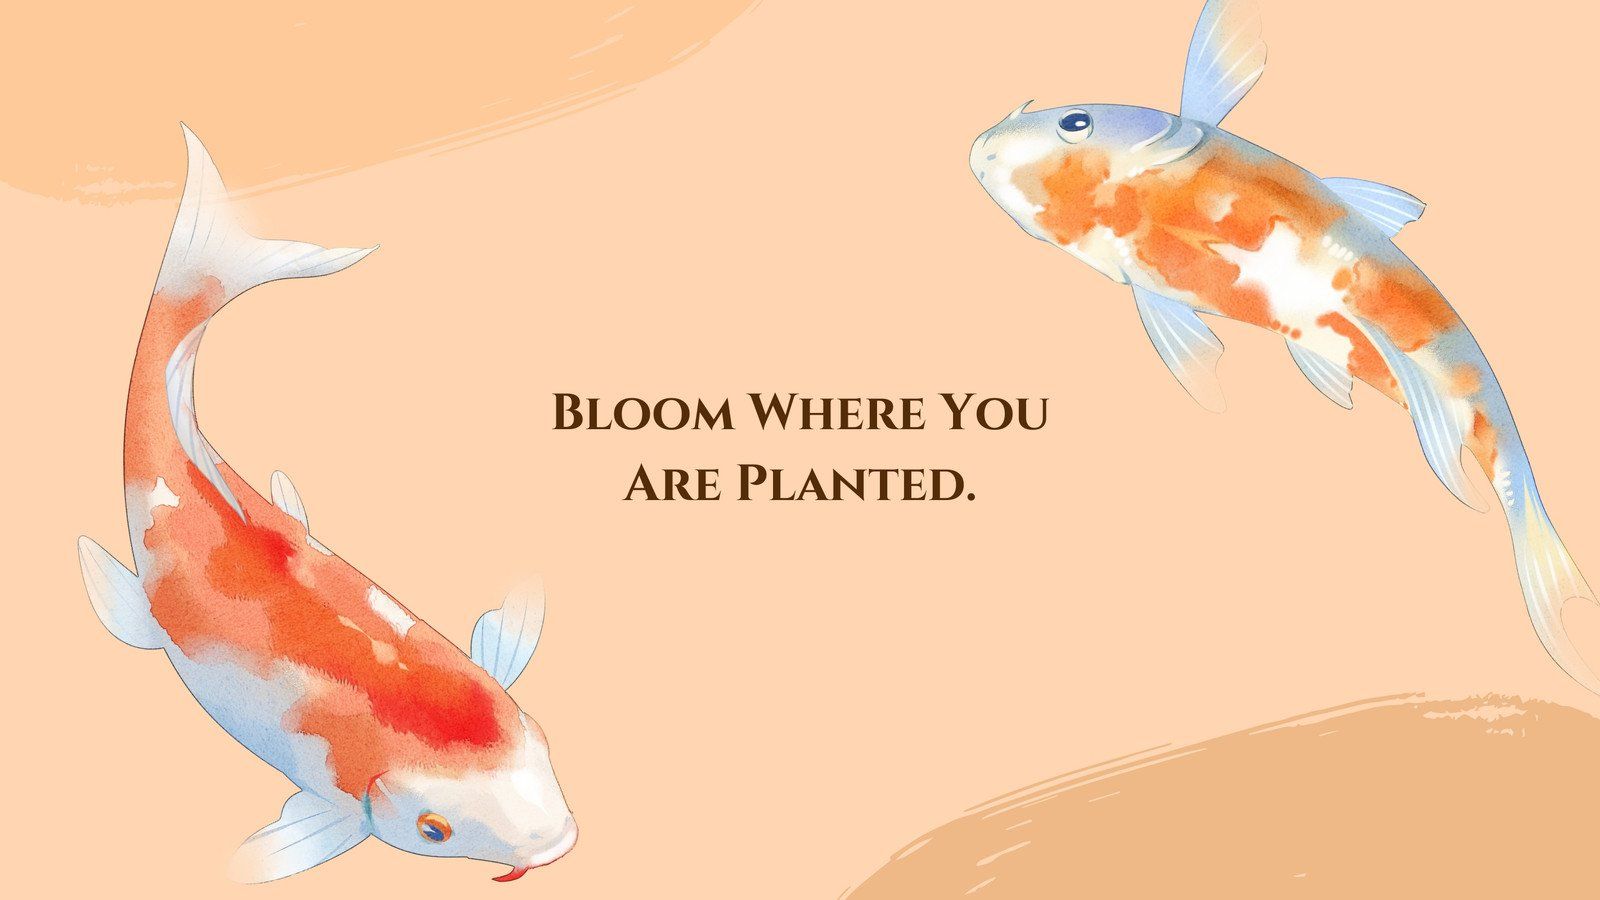 Bloom where you are planted desktop wallpaper - Fish